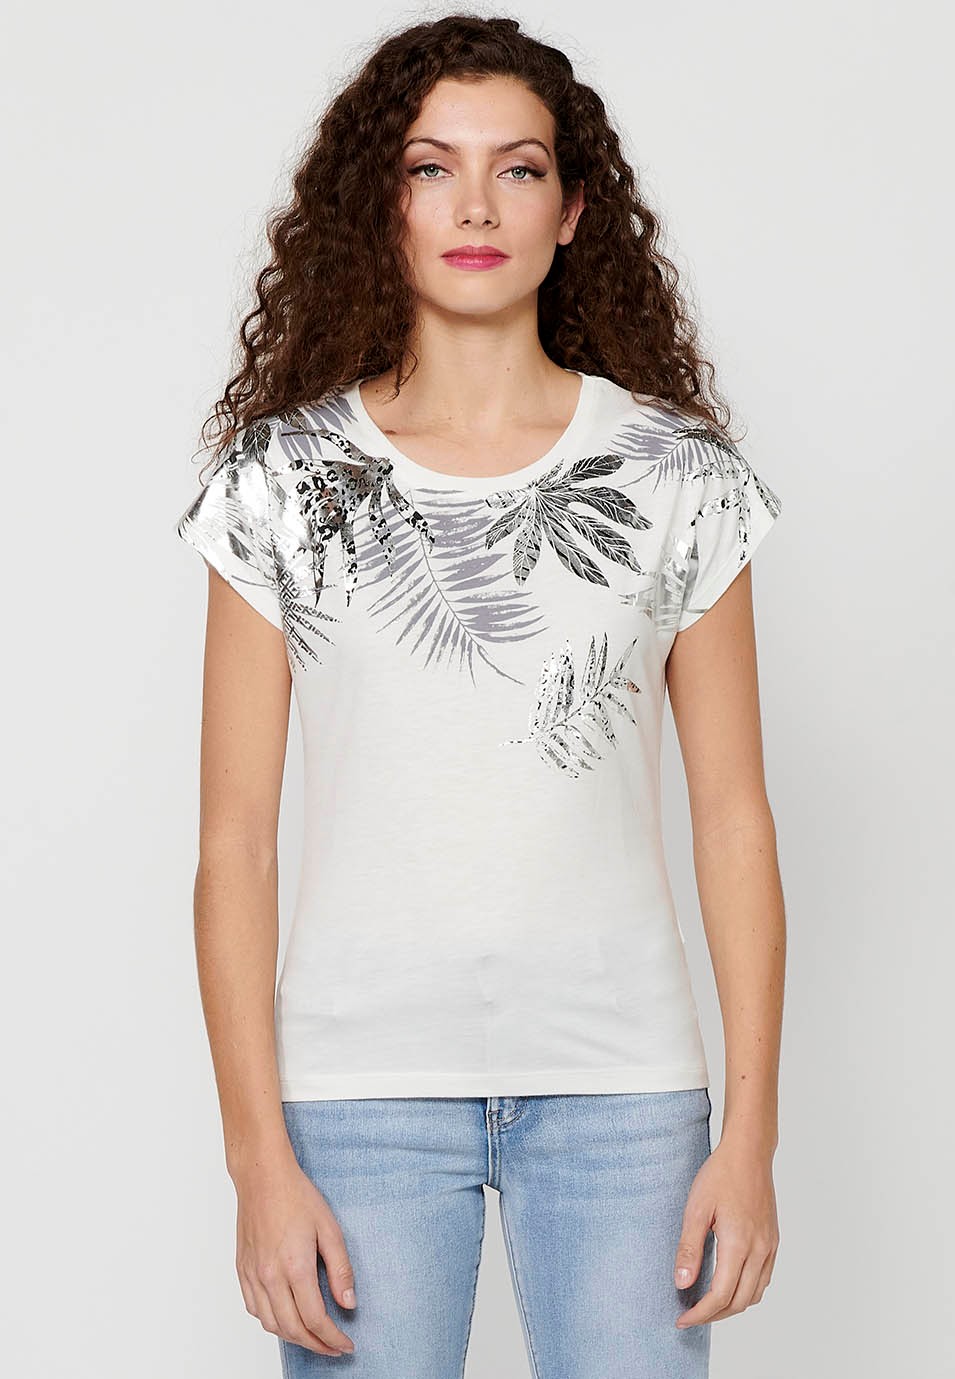 Women's White Color Front Print Round Neck Short Sleeve T-shirt